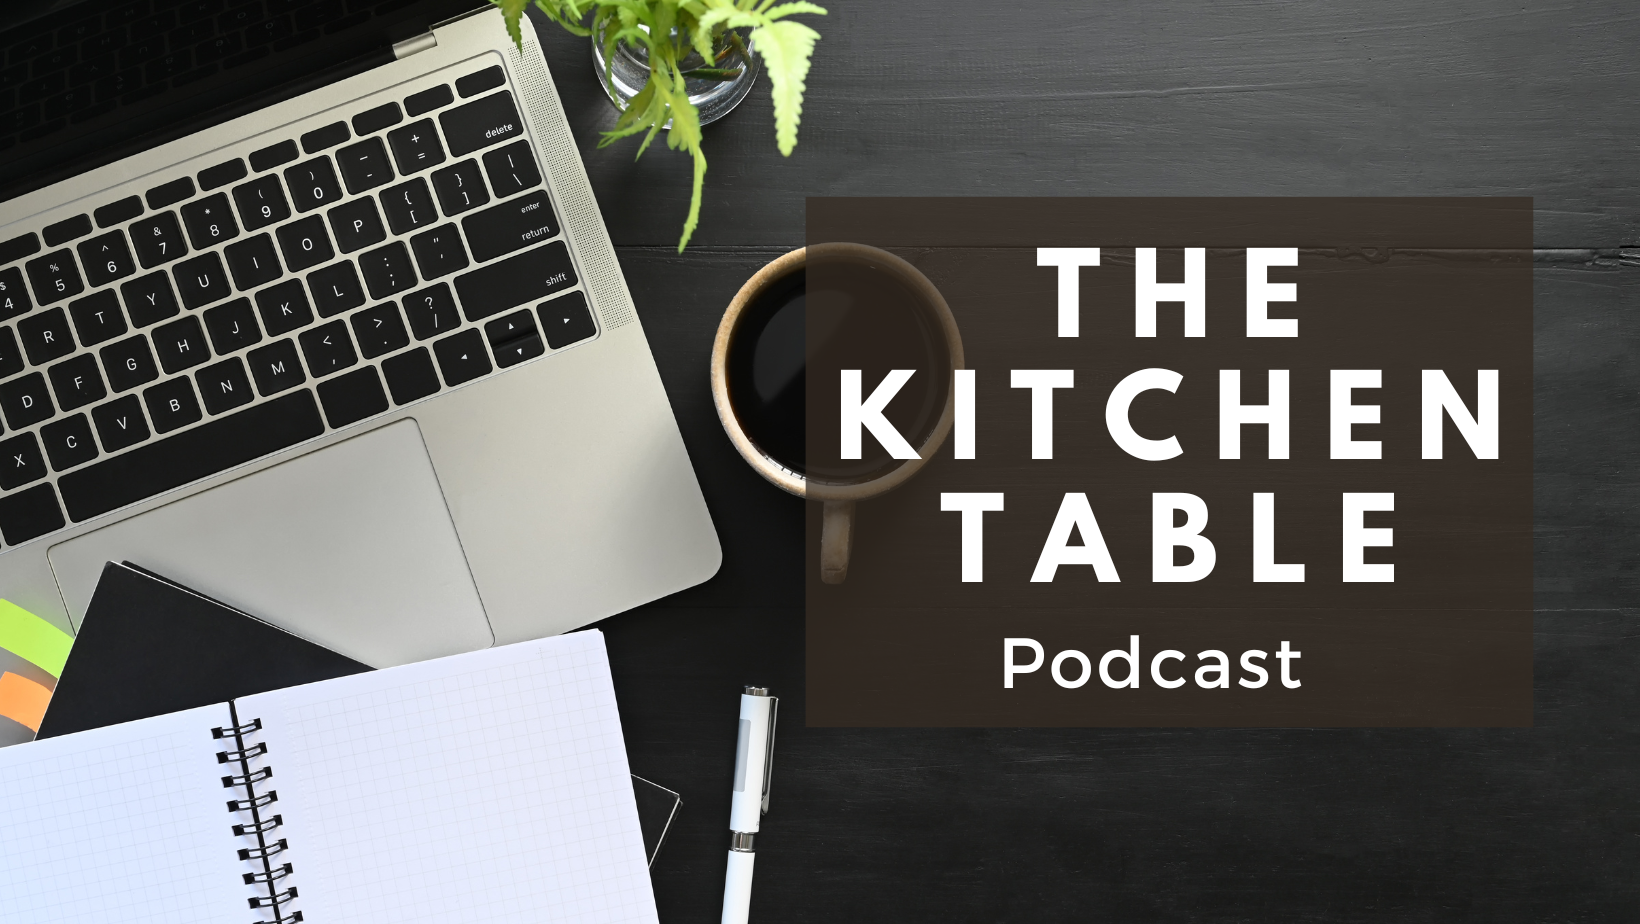 The Kitchen Table Podcast Review: Unpacking Business Insights